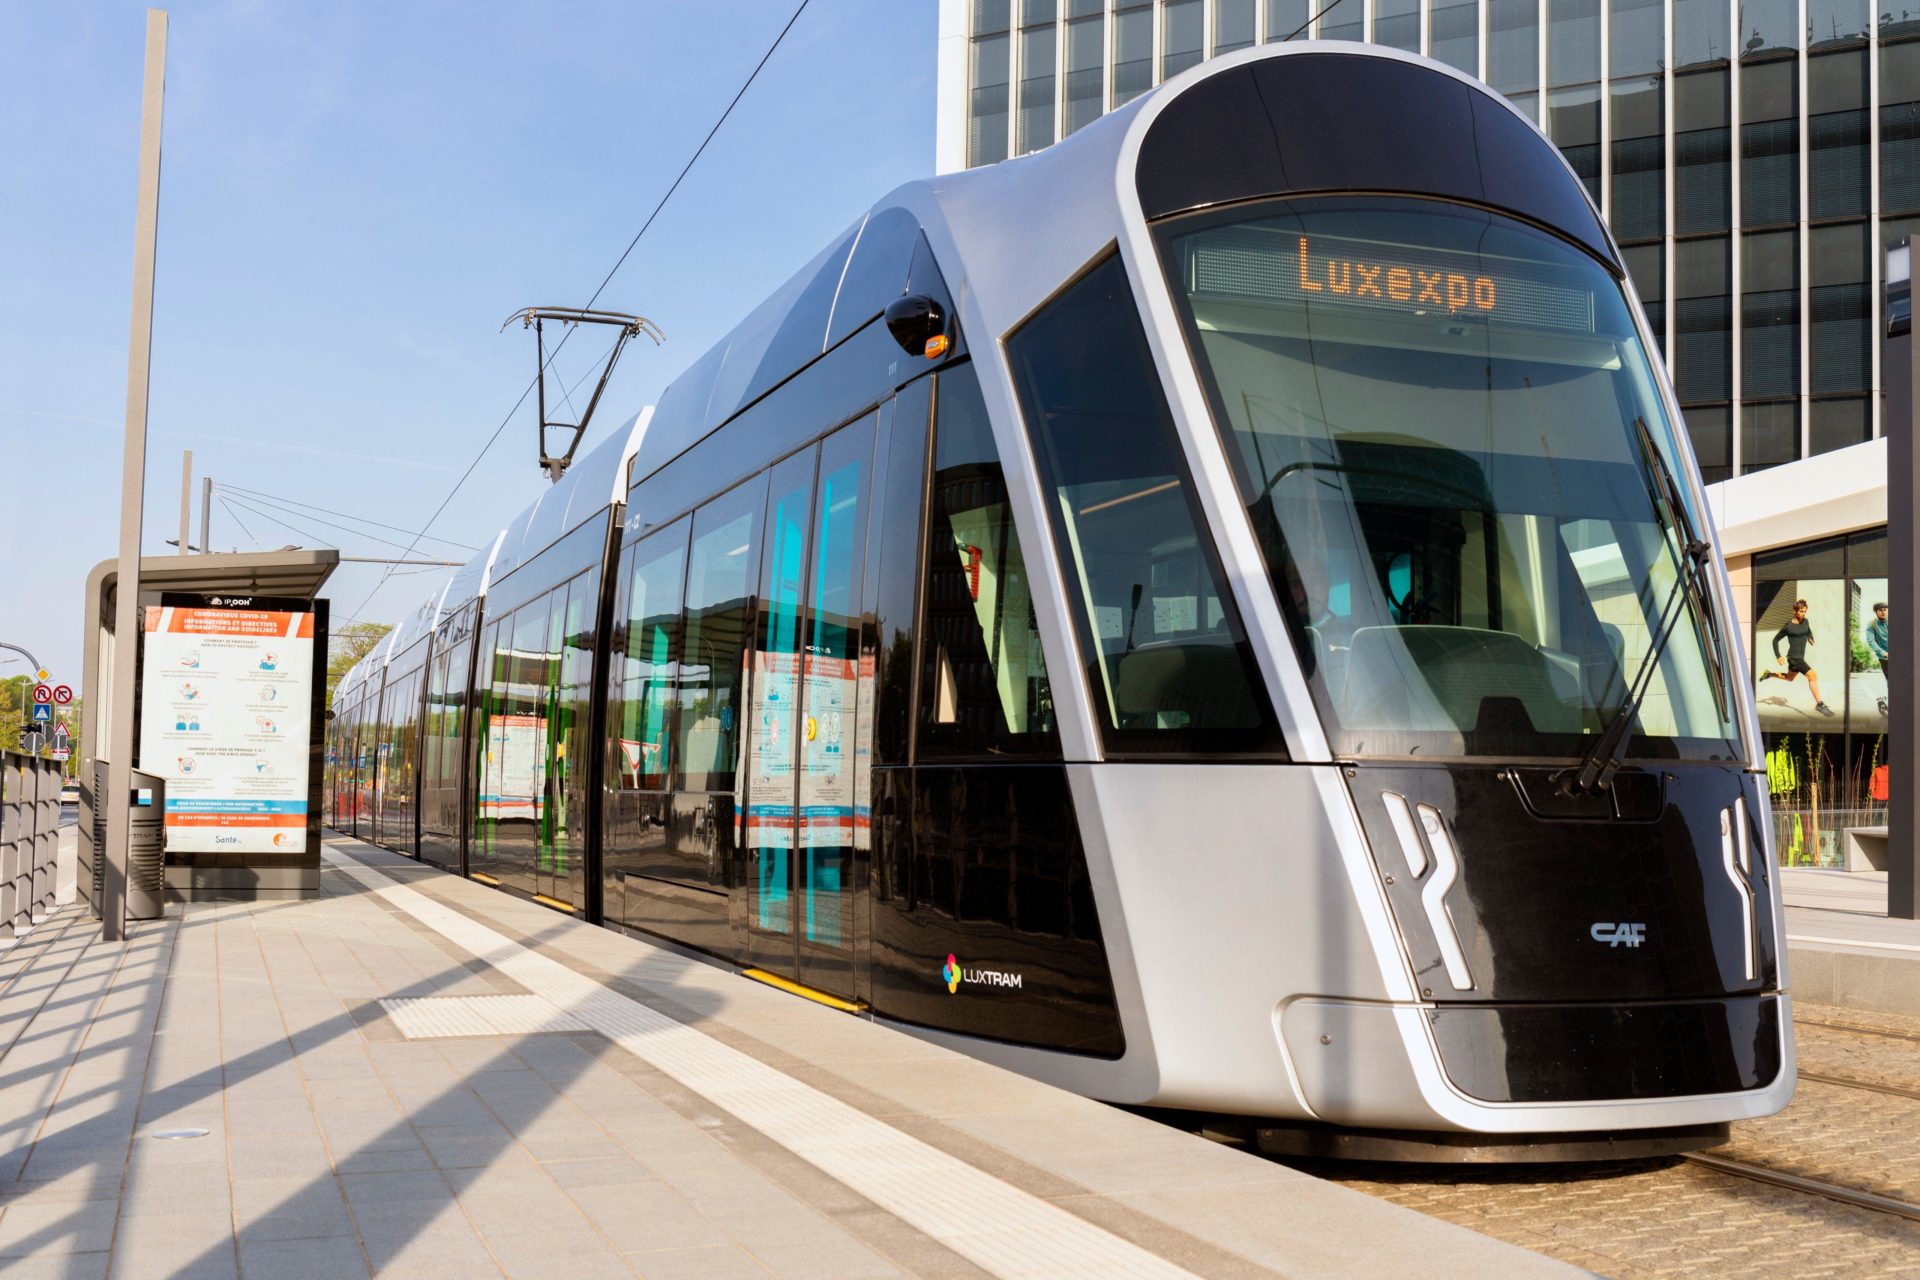 A tram pulling up at the Philharmonie - Mudam stop in Luxembourg City, Luxembourg in April 2020.